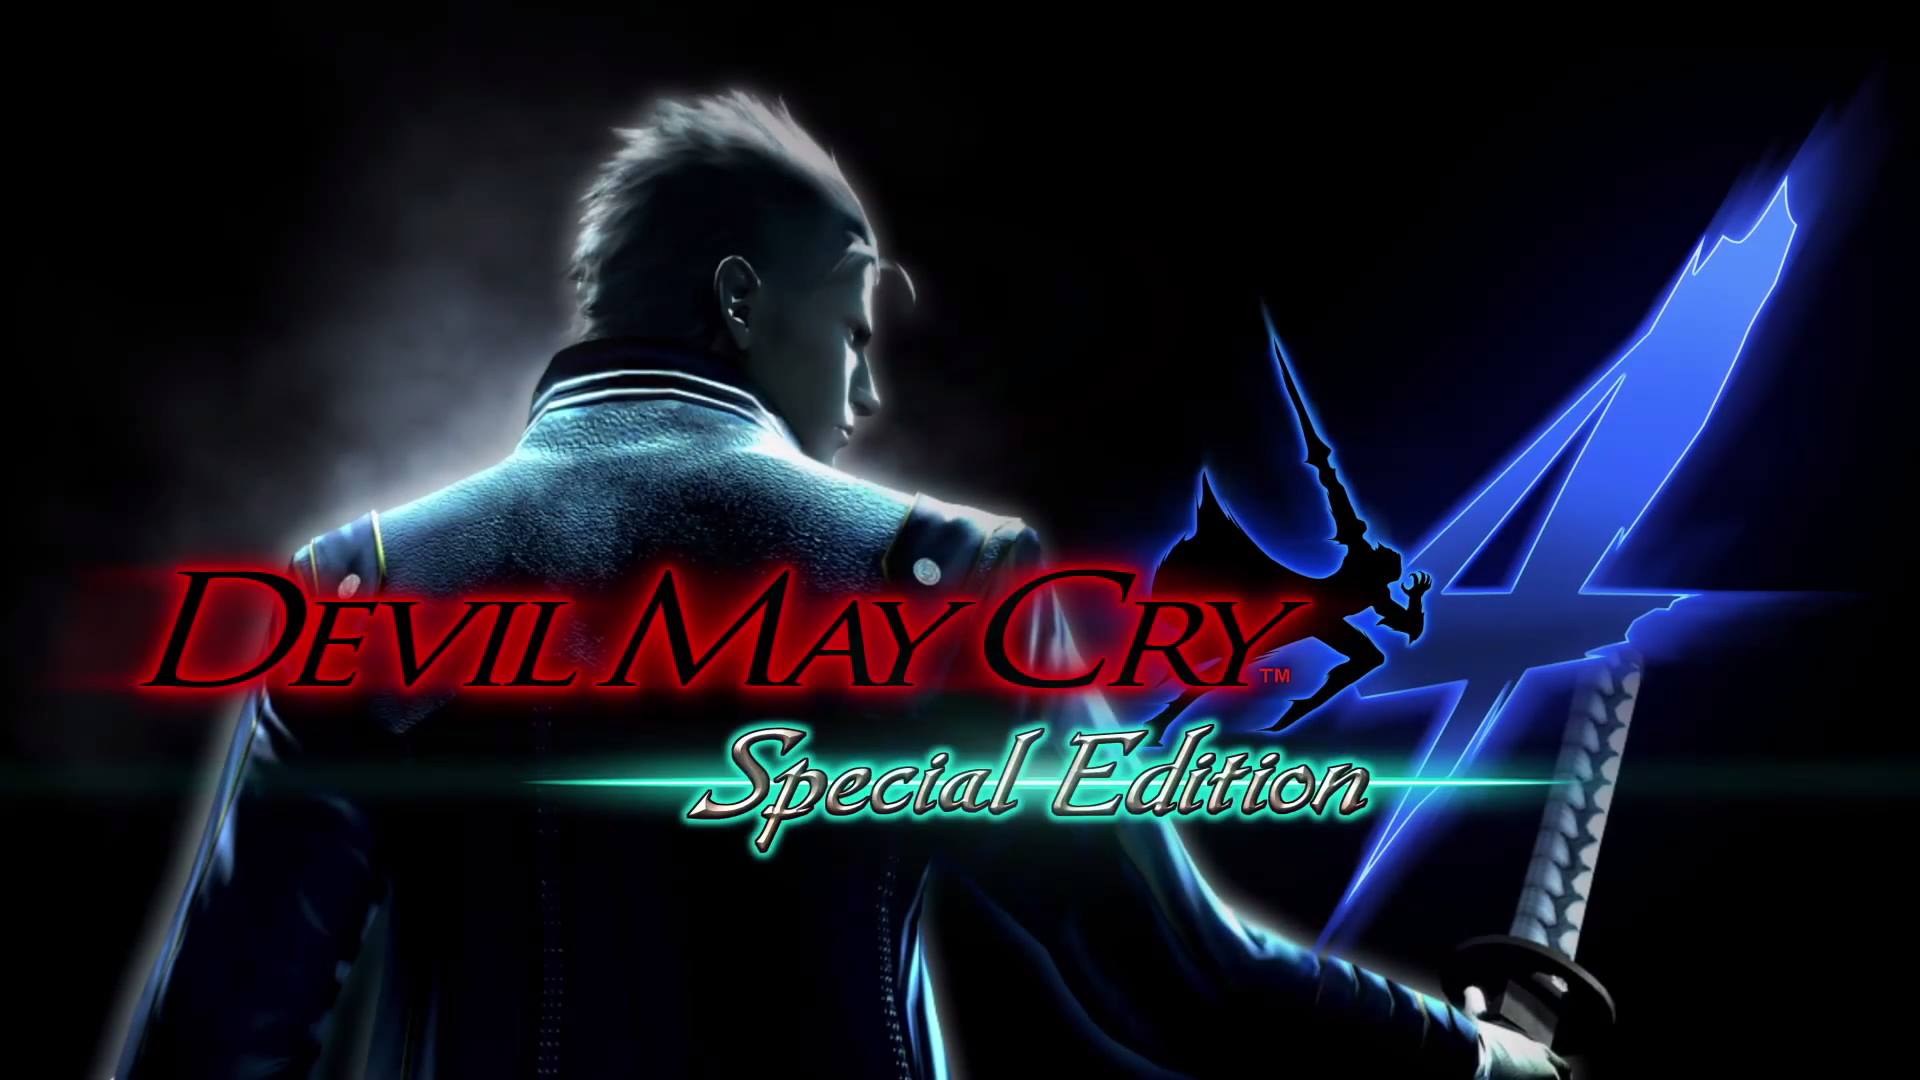 DMC4 Special Edition Confirmed For PS4 (w Vergil). Devil May Cry